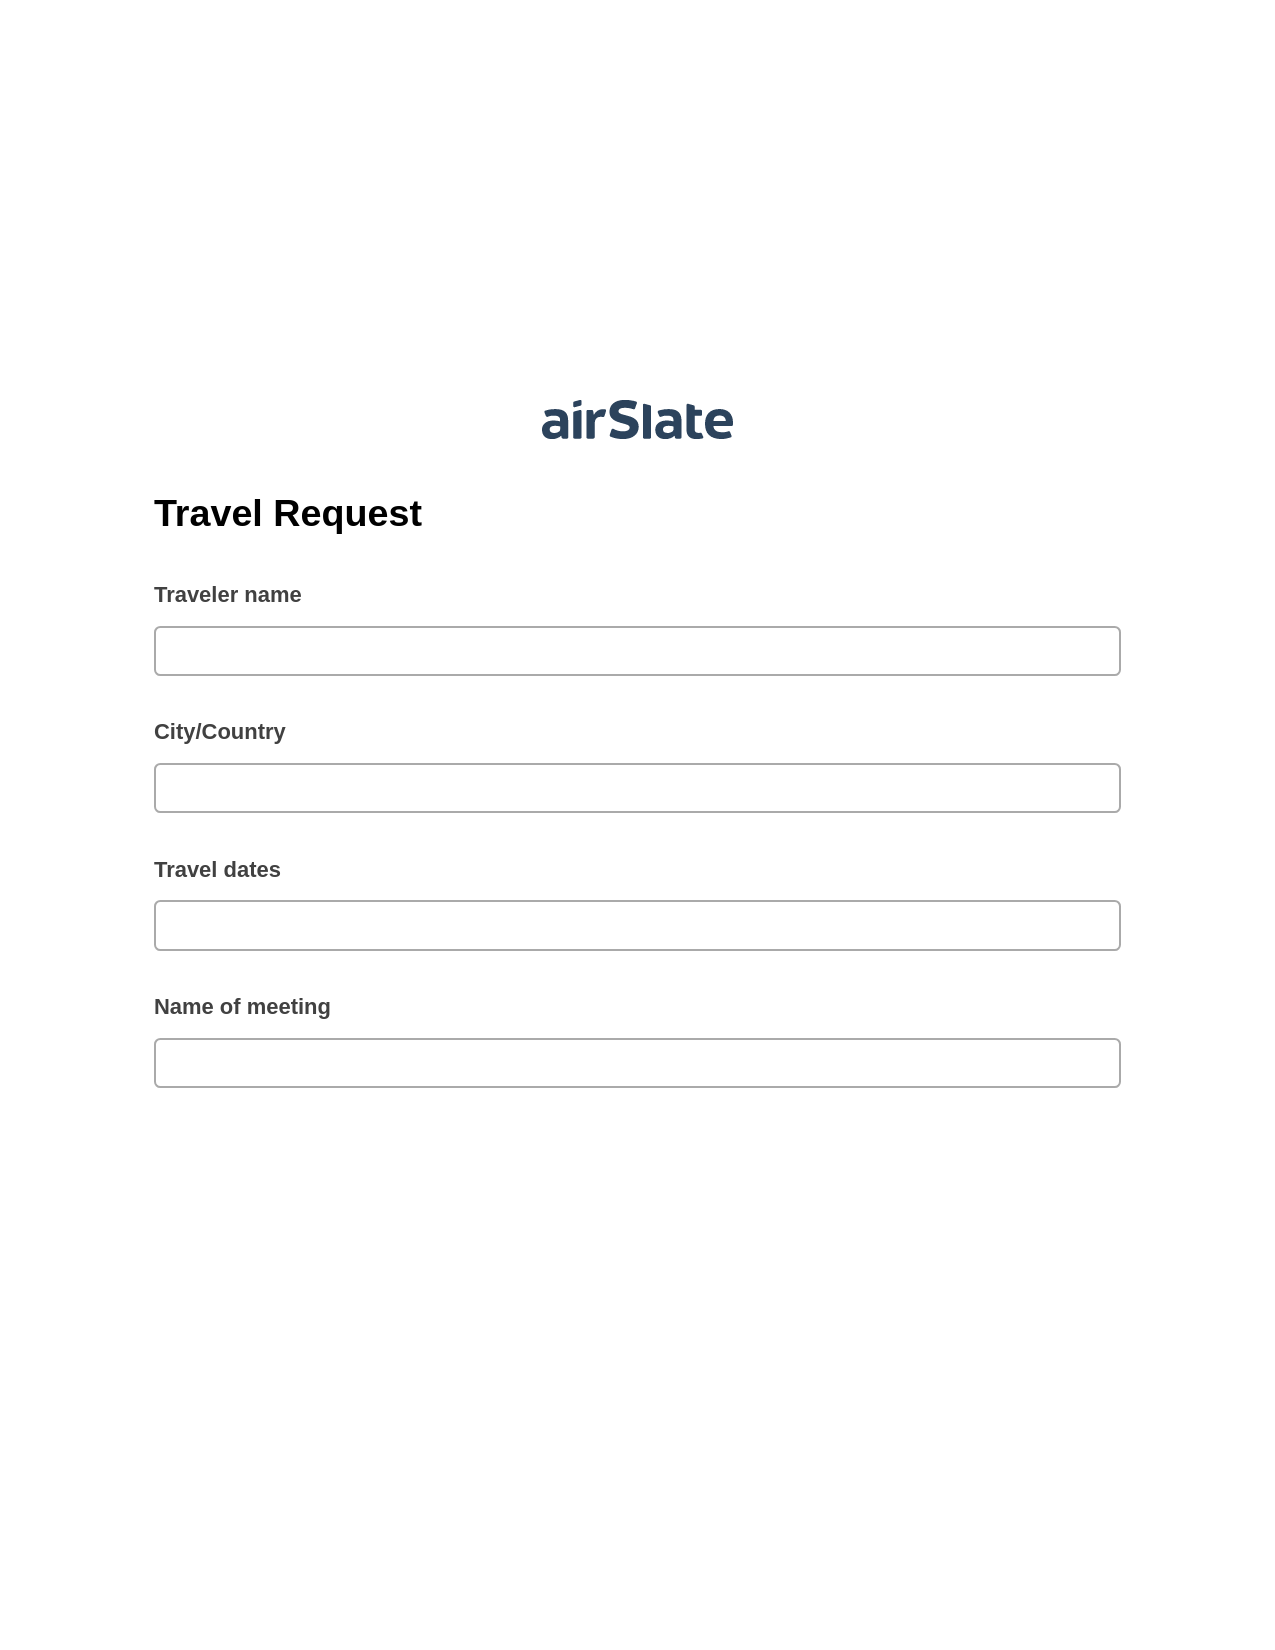 Travel Request Pre-fill from CSV File Bot, Create slate addon, Export to Salesforce Bot